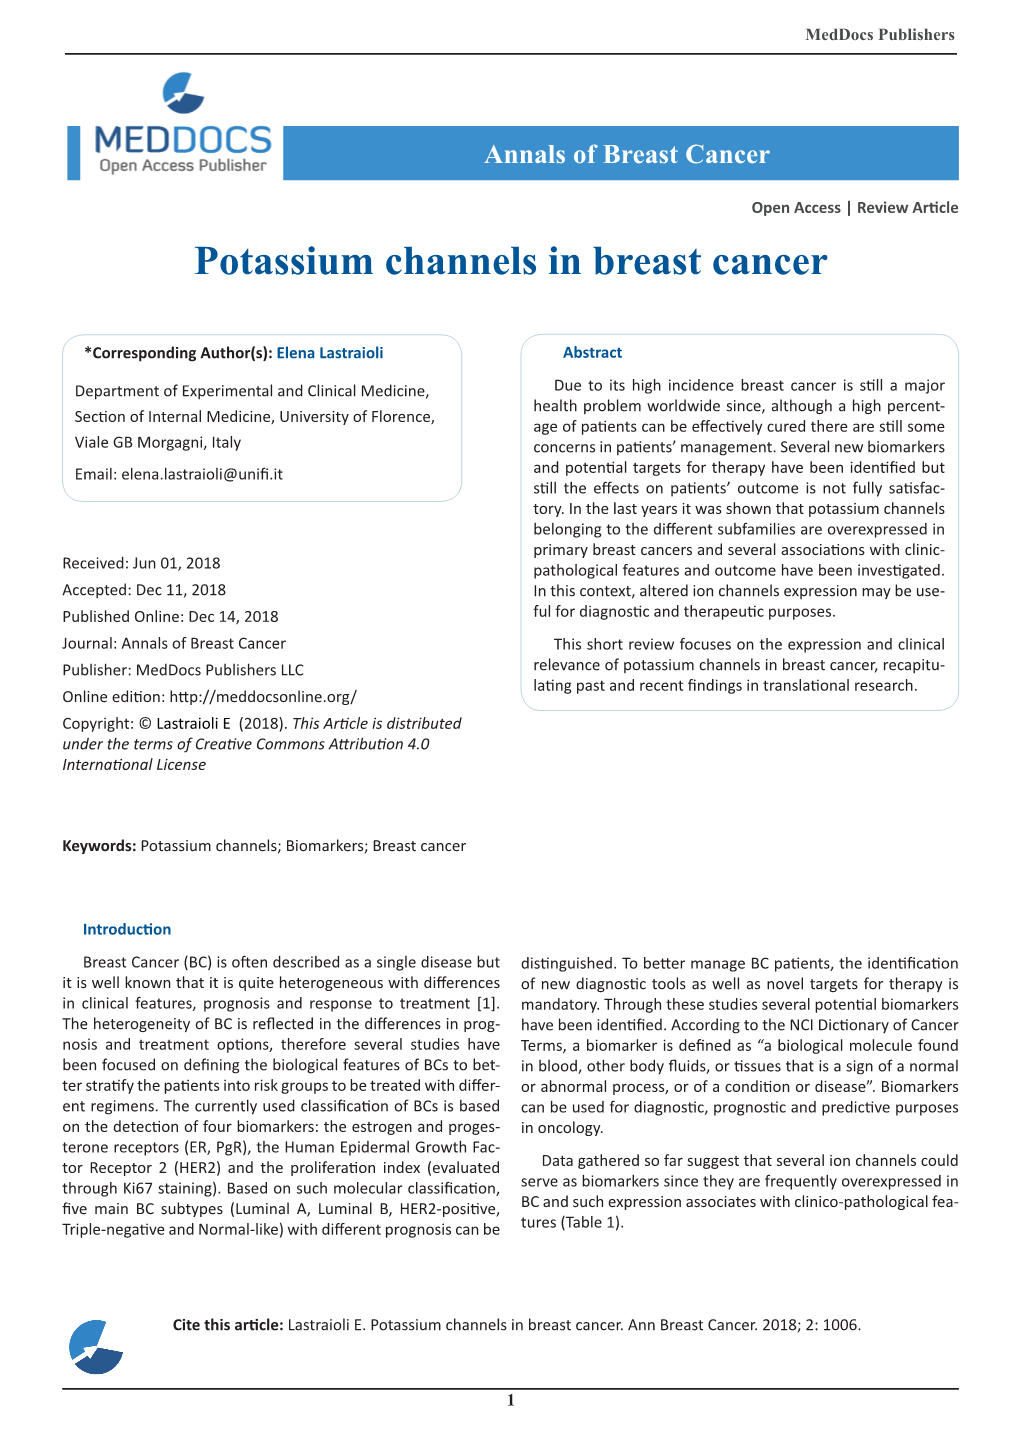 Potassium Channels in Breast Cancer